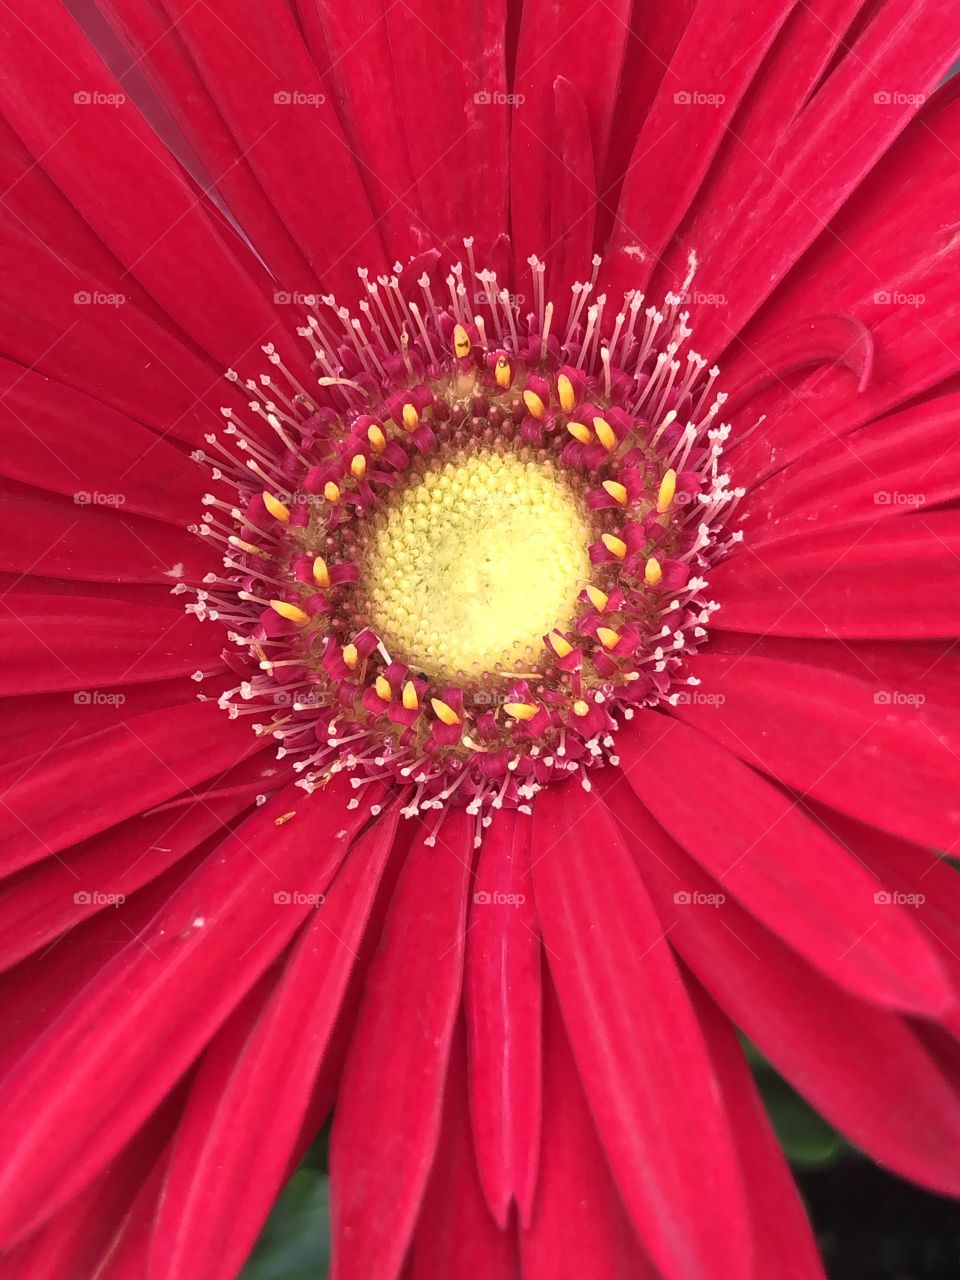 Red Gerber daisy close up blooming 